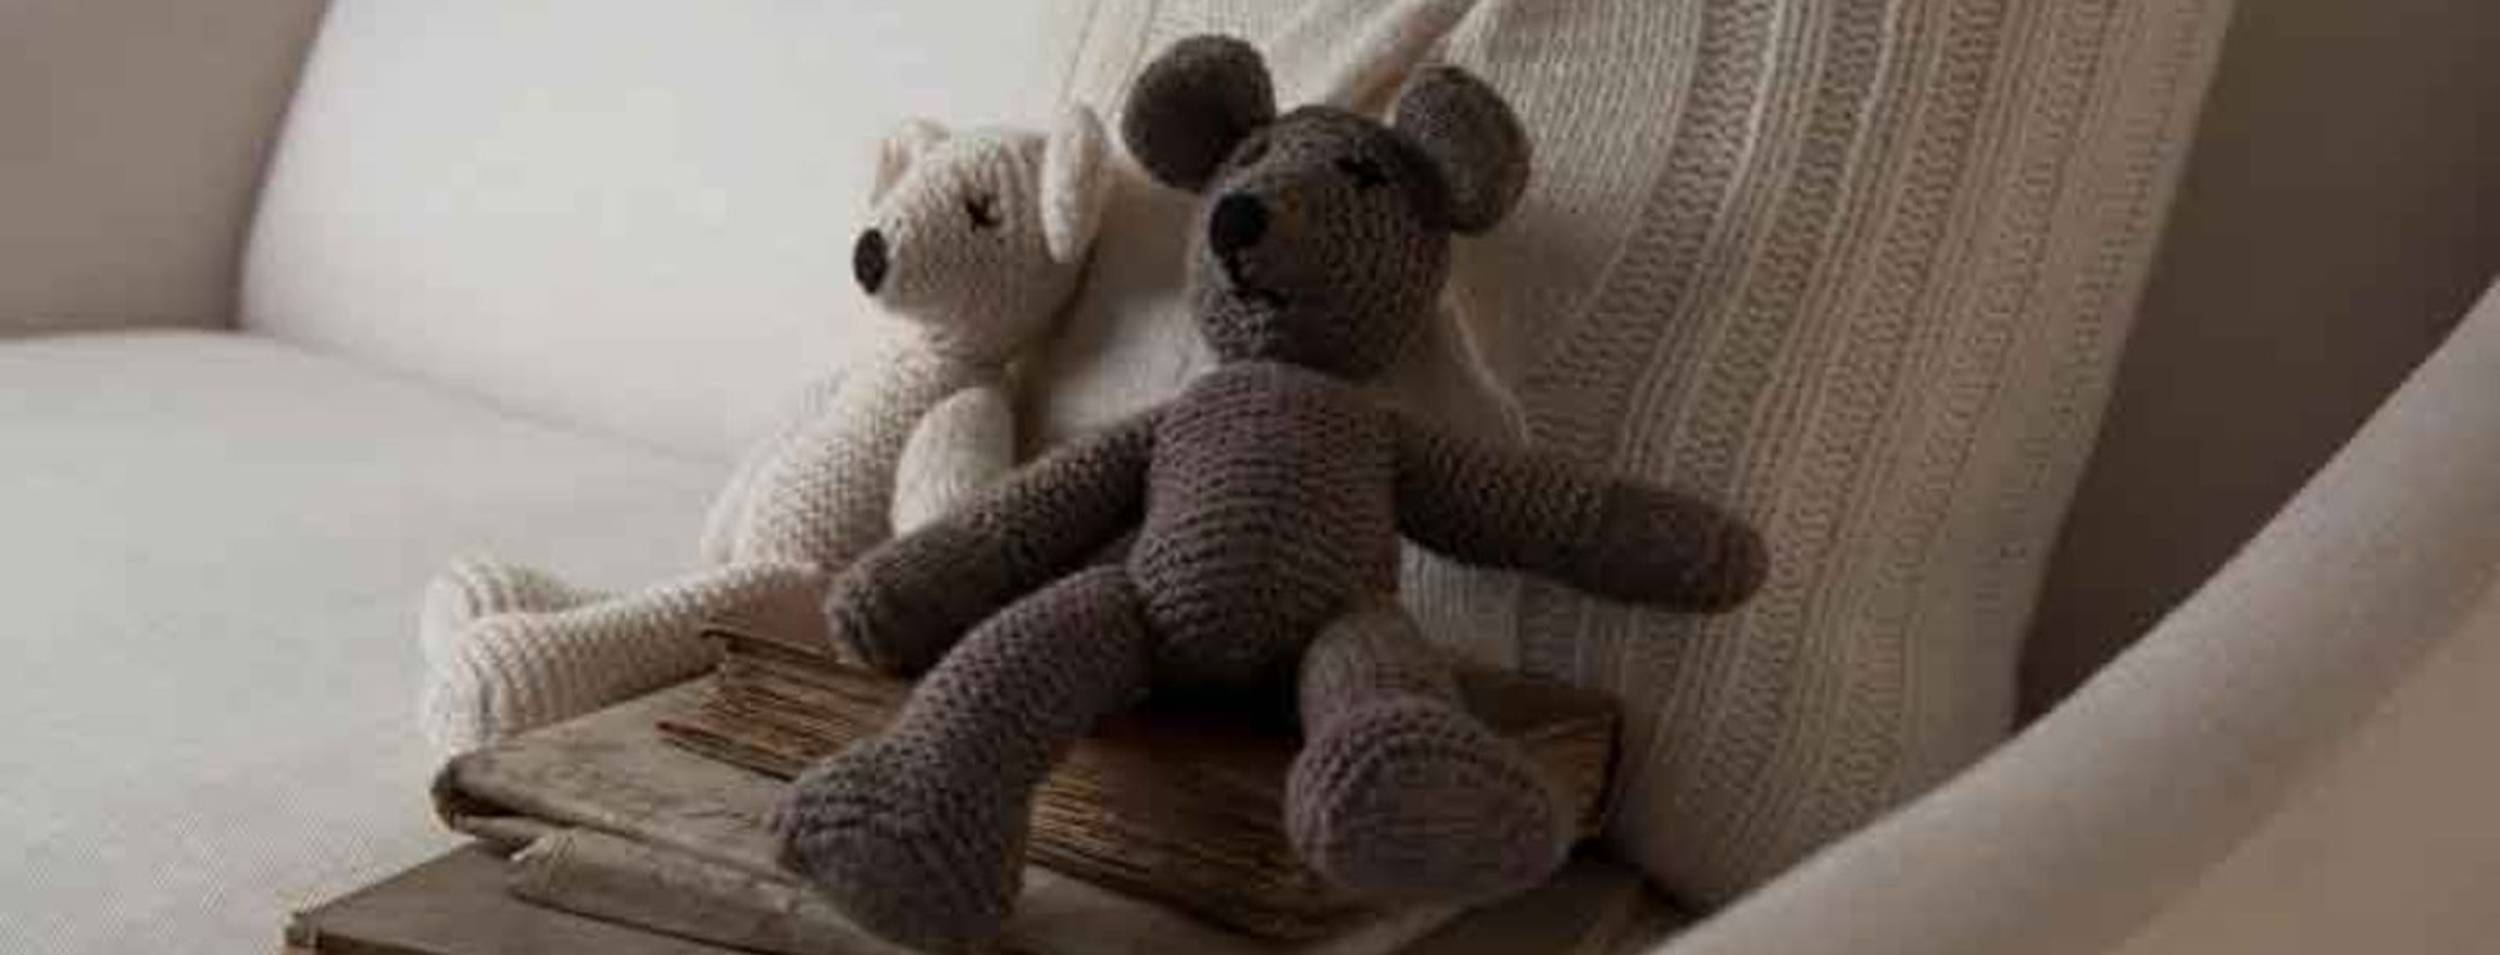 Cashmere Teddy Bears are here at Last!